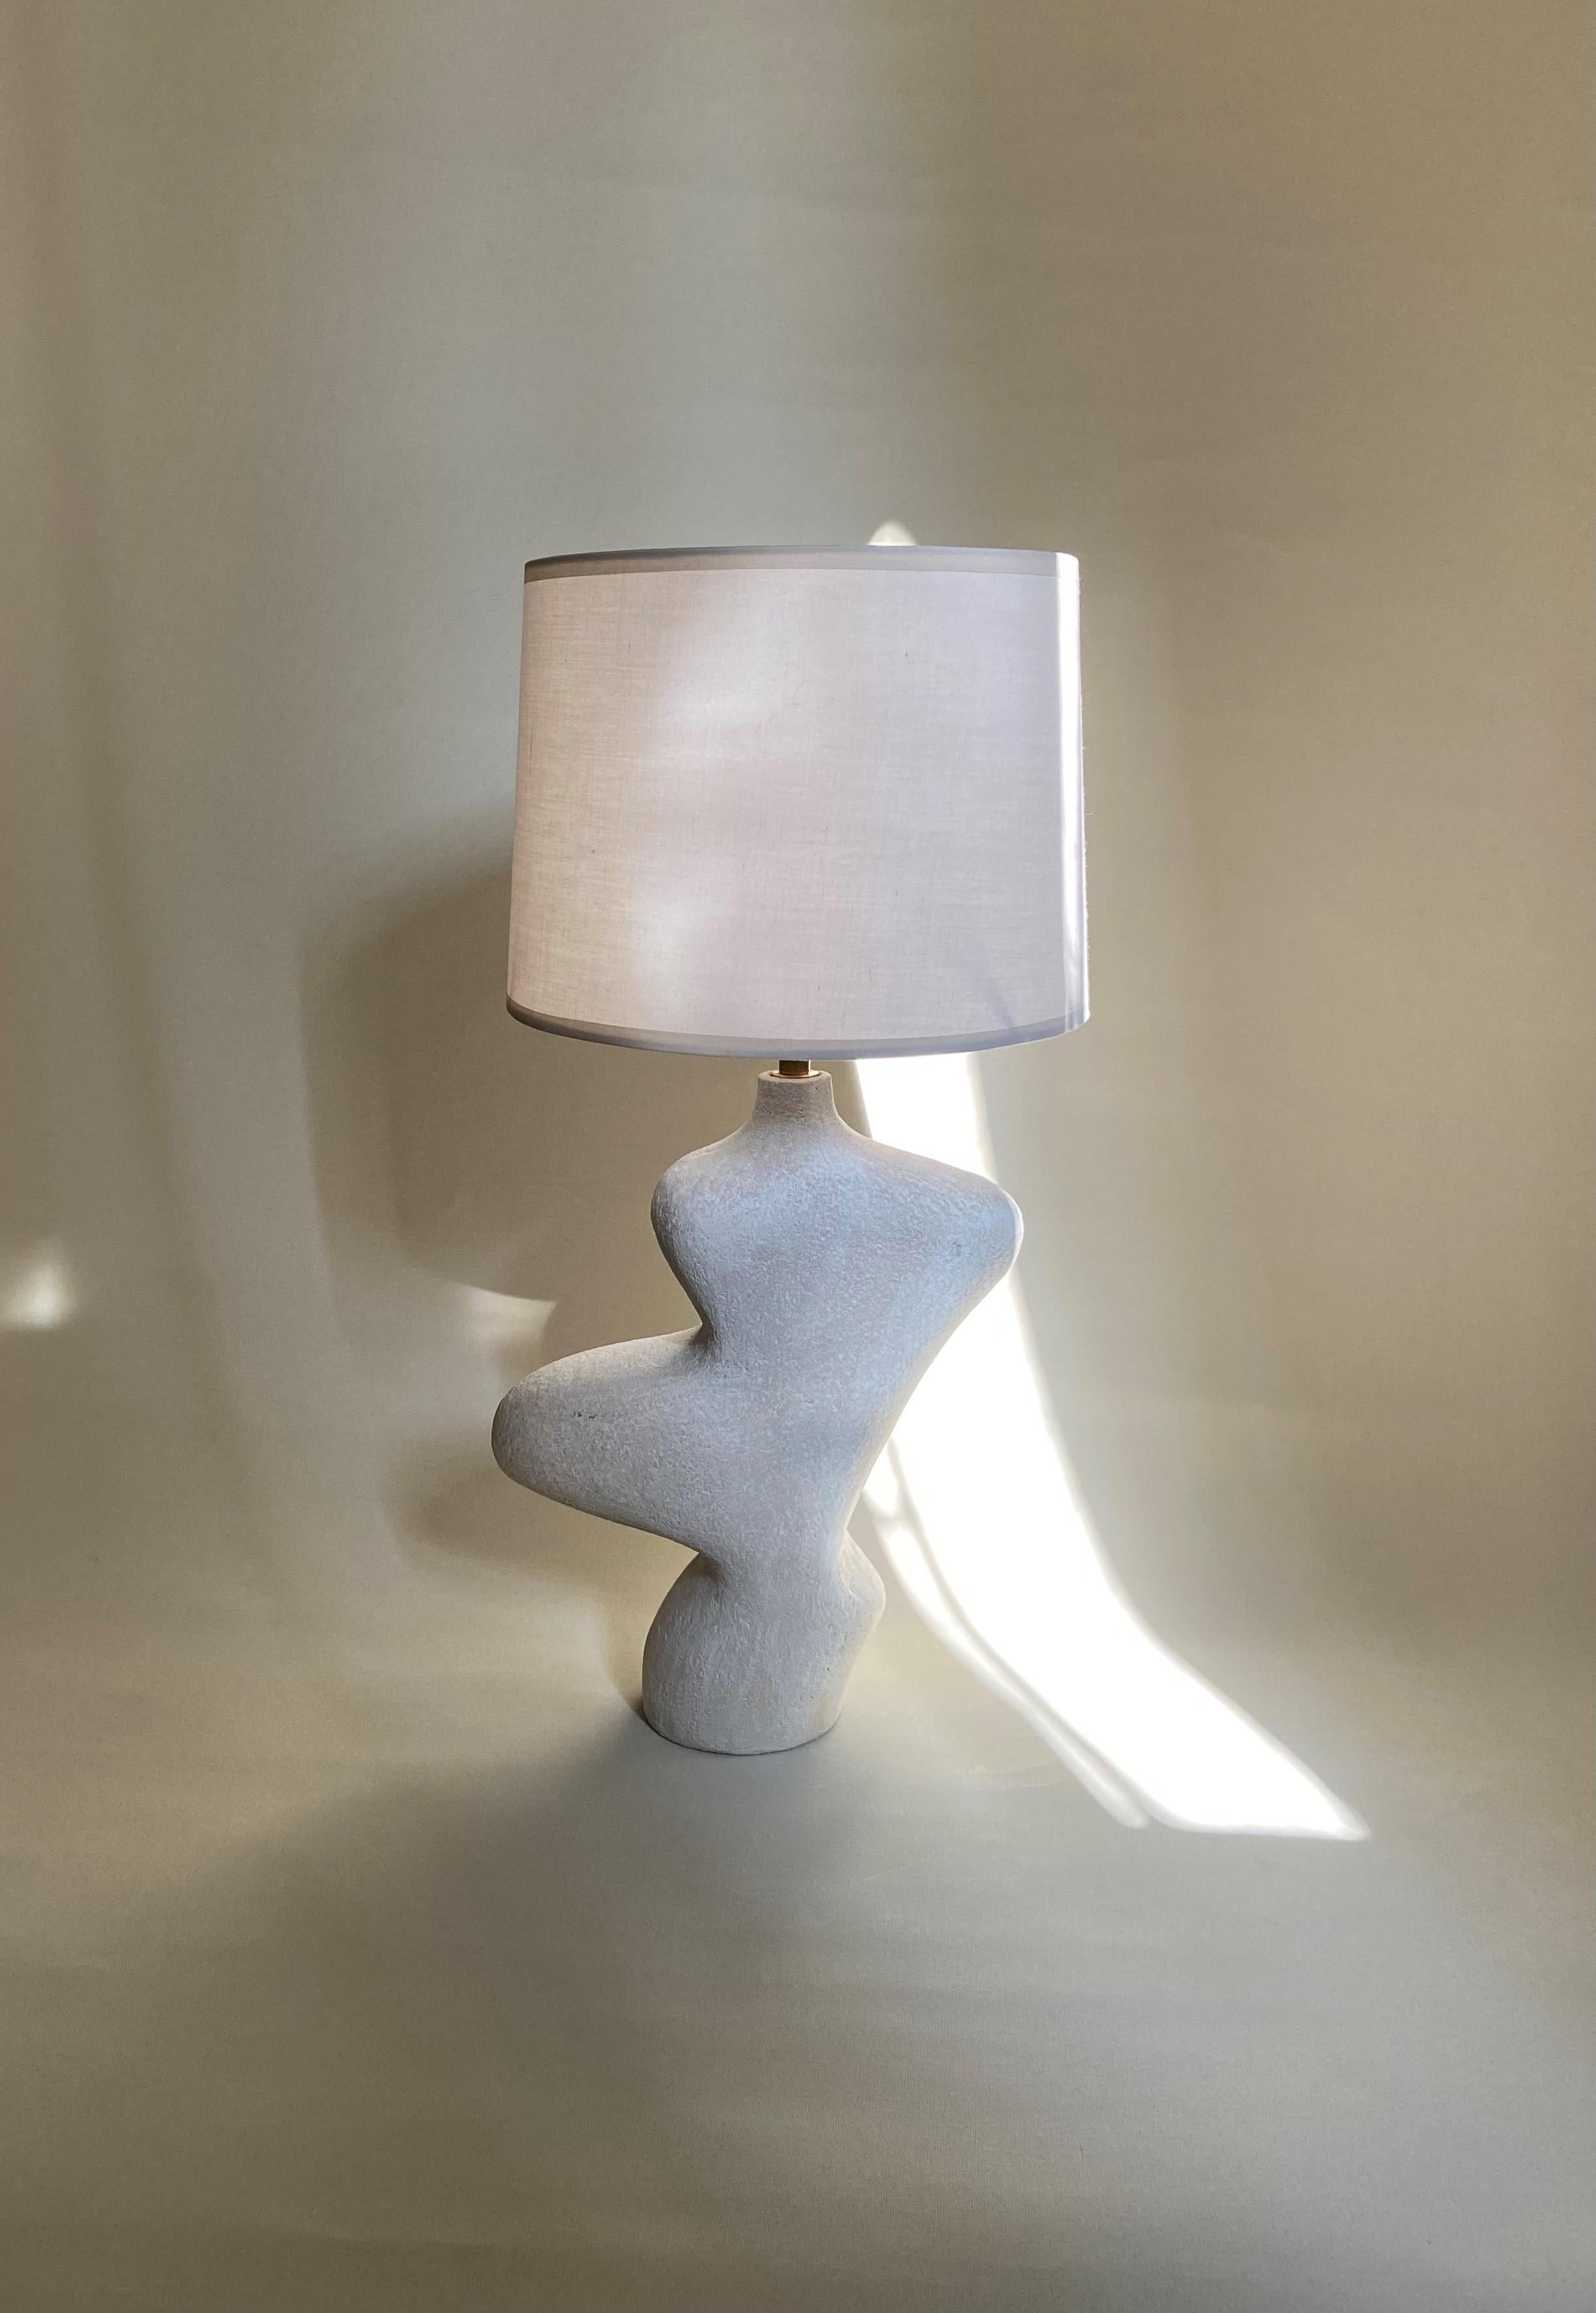 M35 lamp by Aysun Ay
Dimensions: D25 x H46
Materials: Stoneware ceramic, brass hardware, cotton drum, CE certified twisted cable, non-slip bottom sole

All our lamps can be wired according to each country. If sold to the USA it will be wired for the